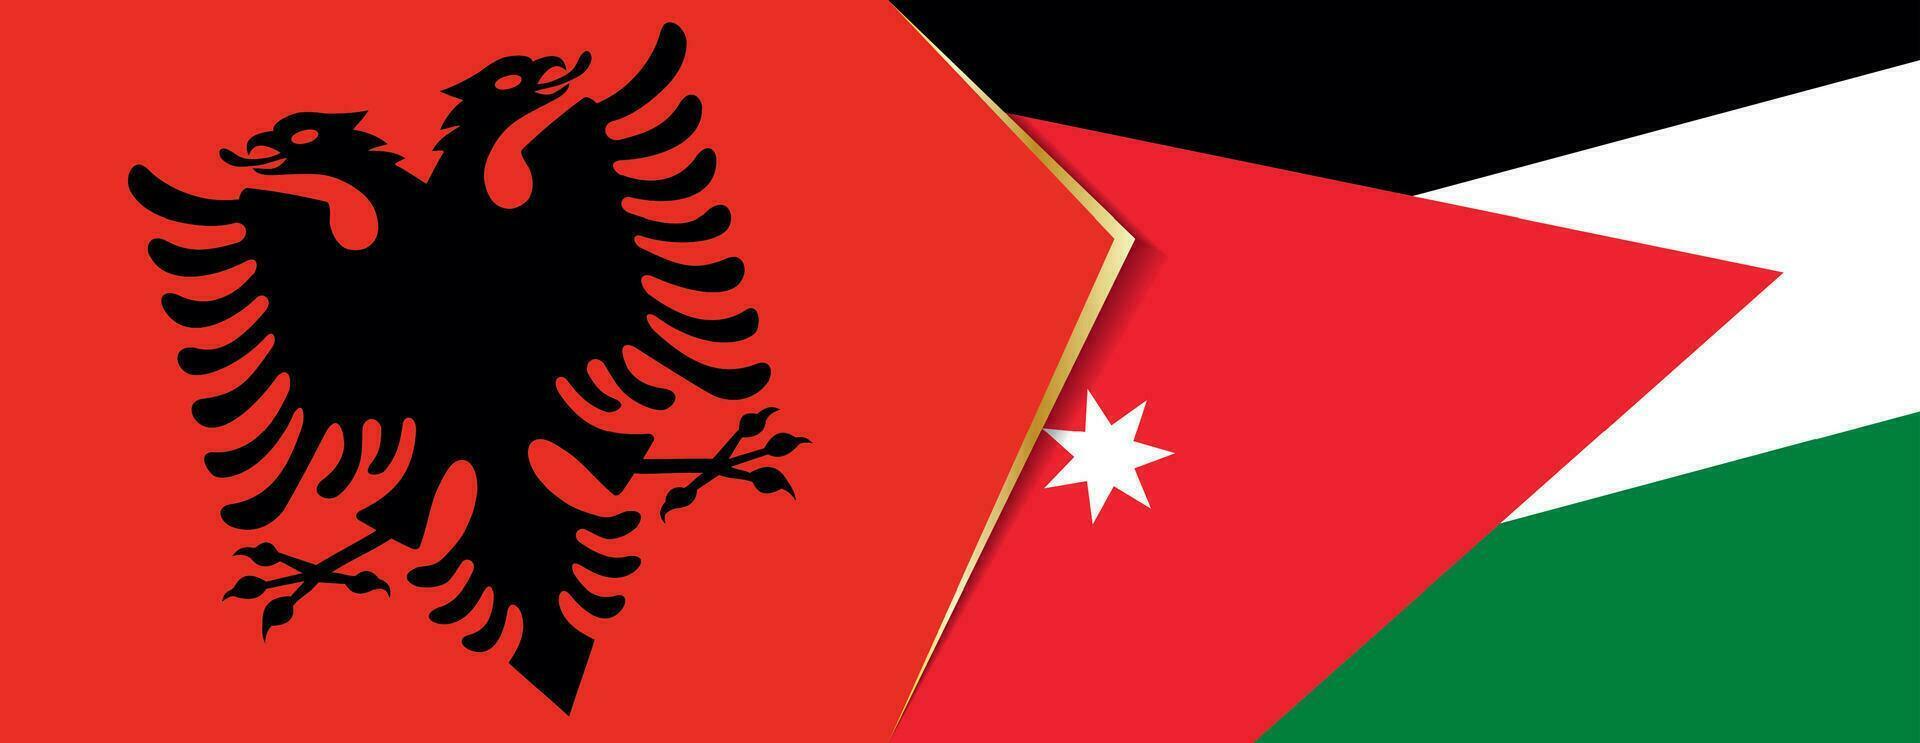 Albania and Jordan flags, two vector flags.